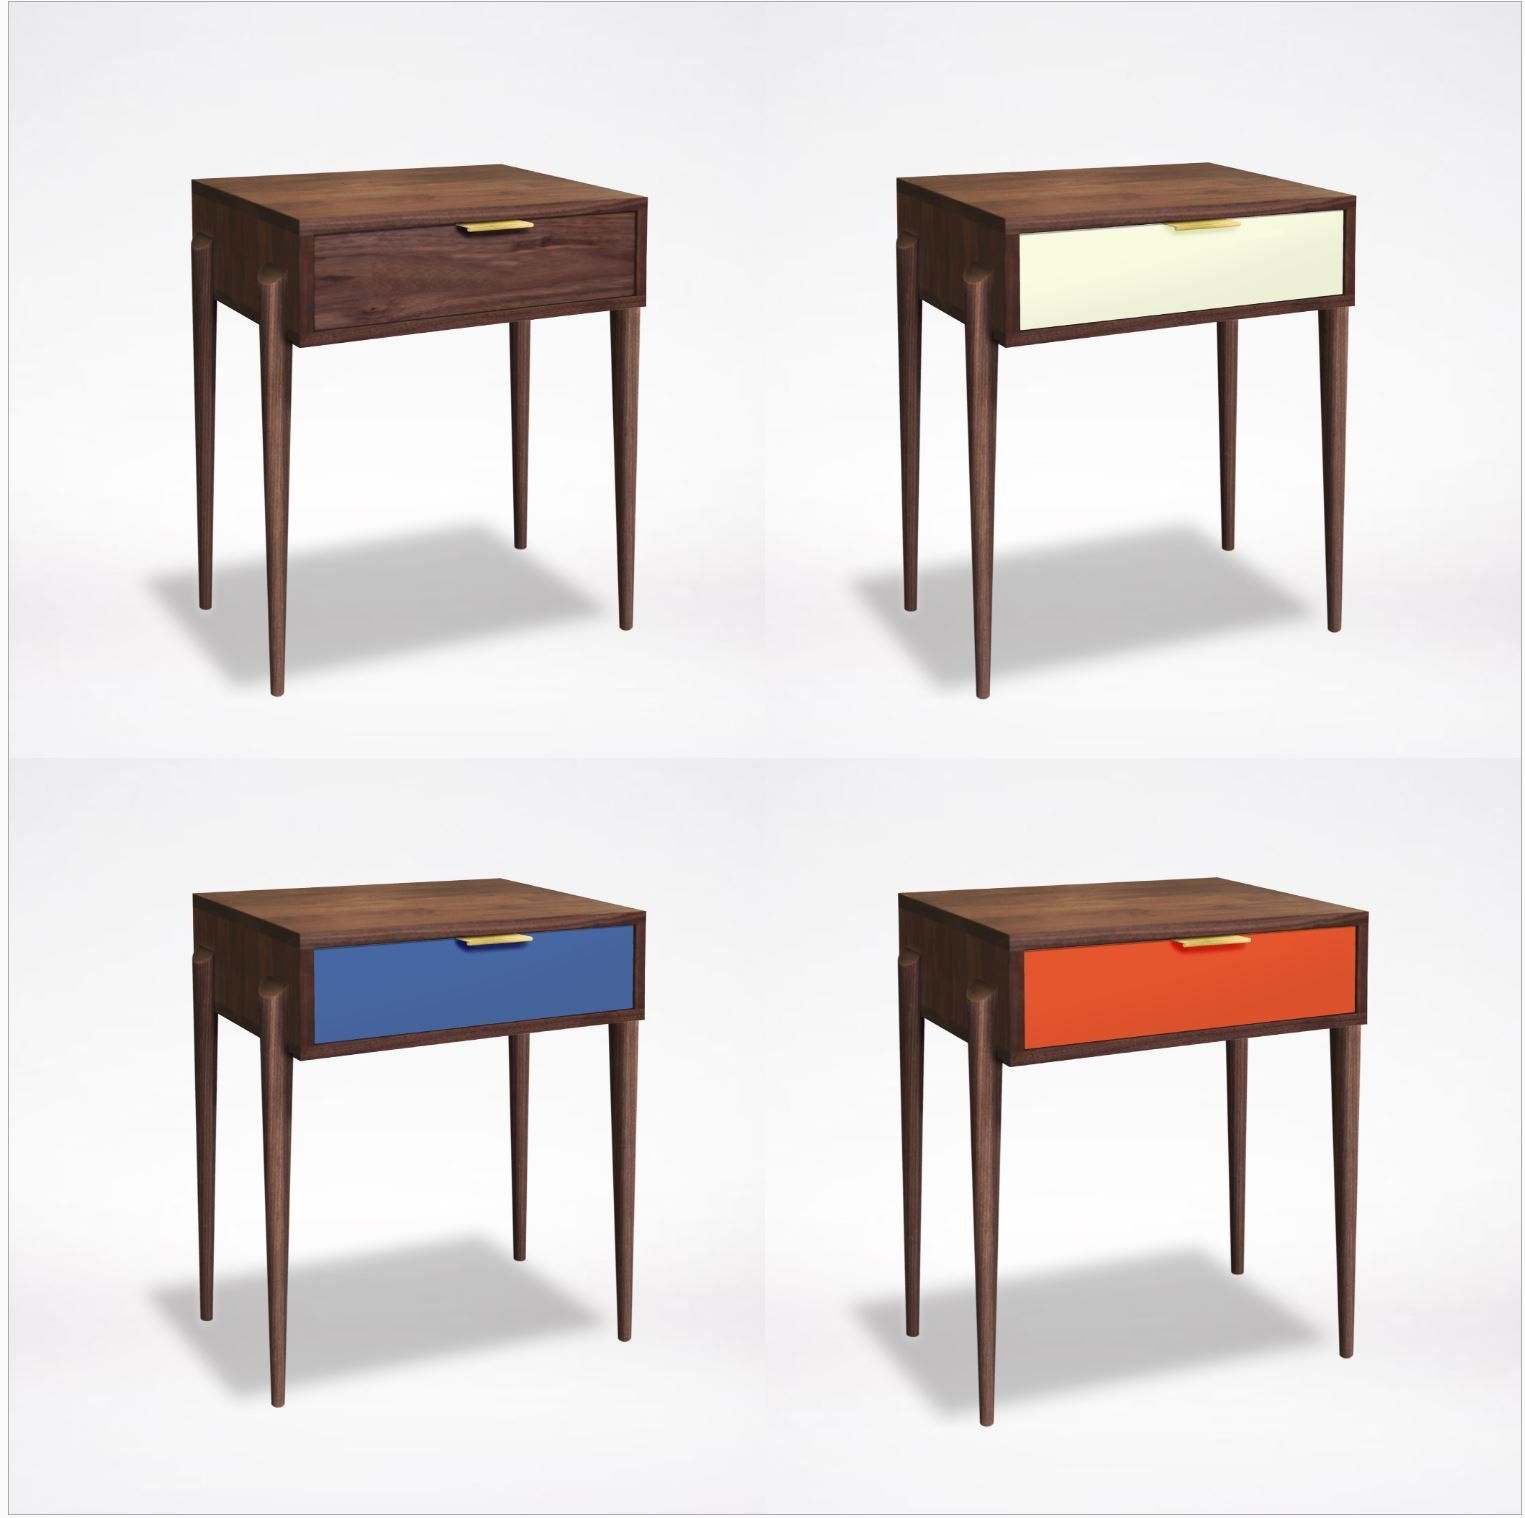 Solid wood side table with multiple color options for the drawer face